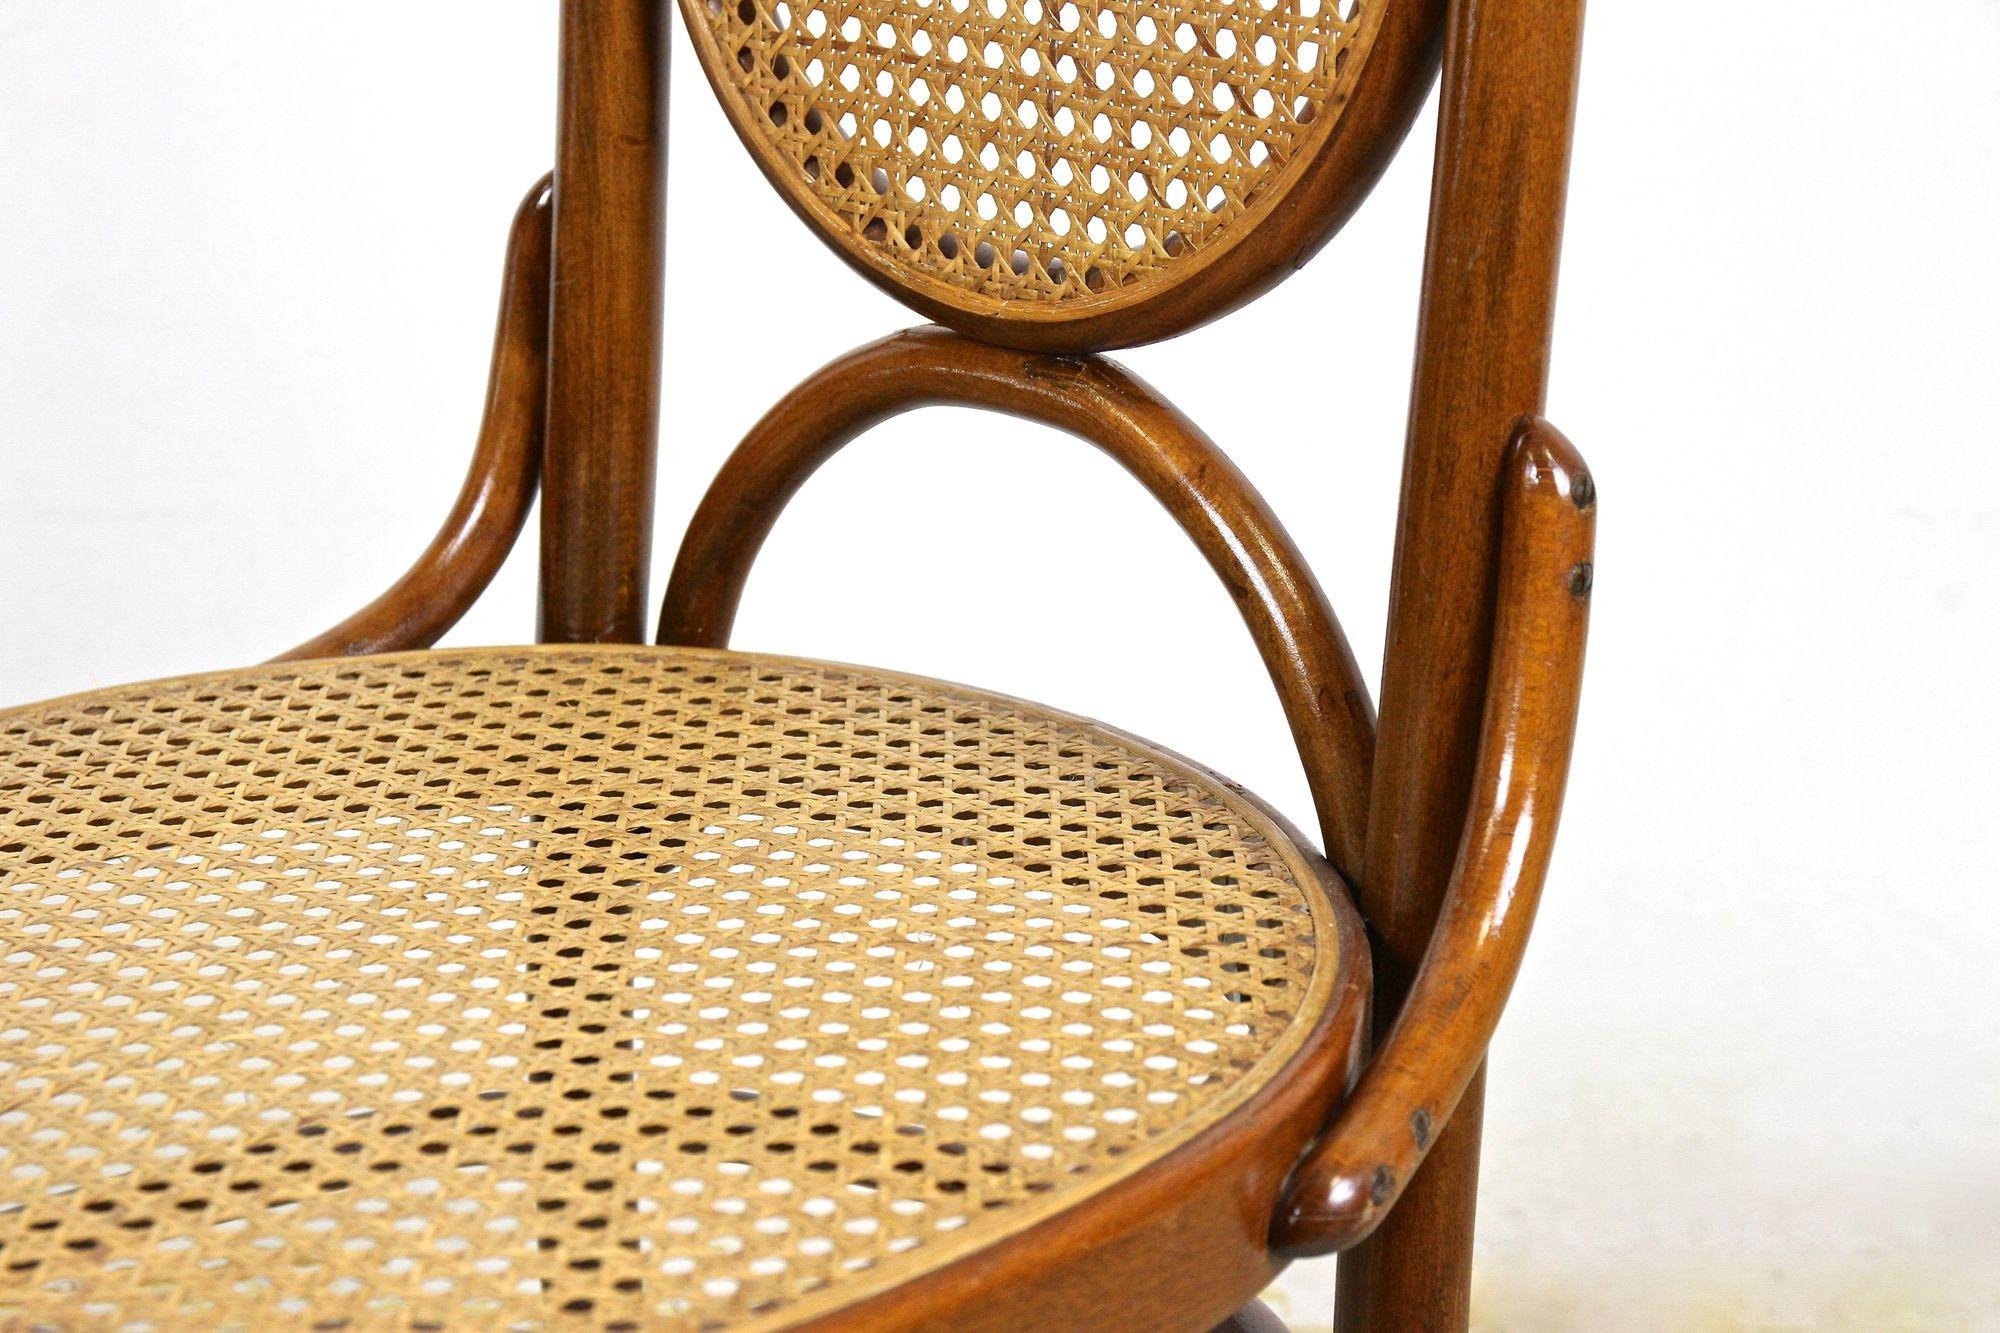 Thonet Bentwood Chairs with Table, Art Nouveau Seating Set, Austria, circa 1915 For Sale 1